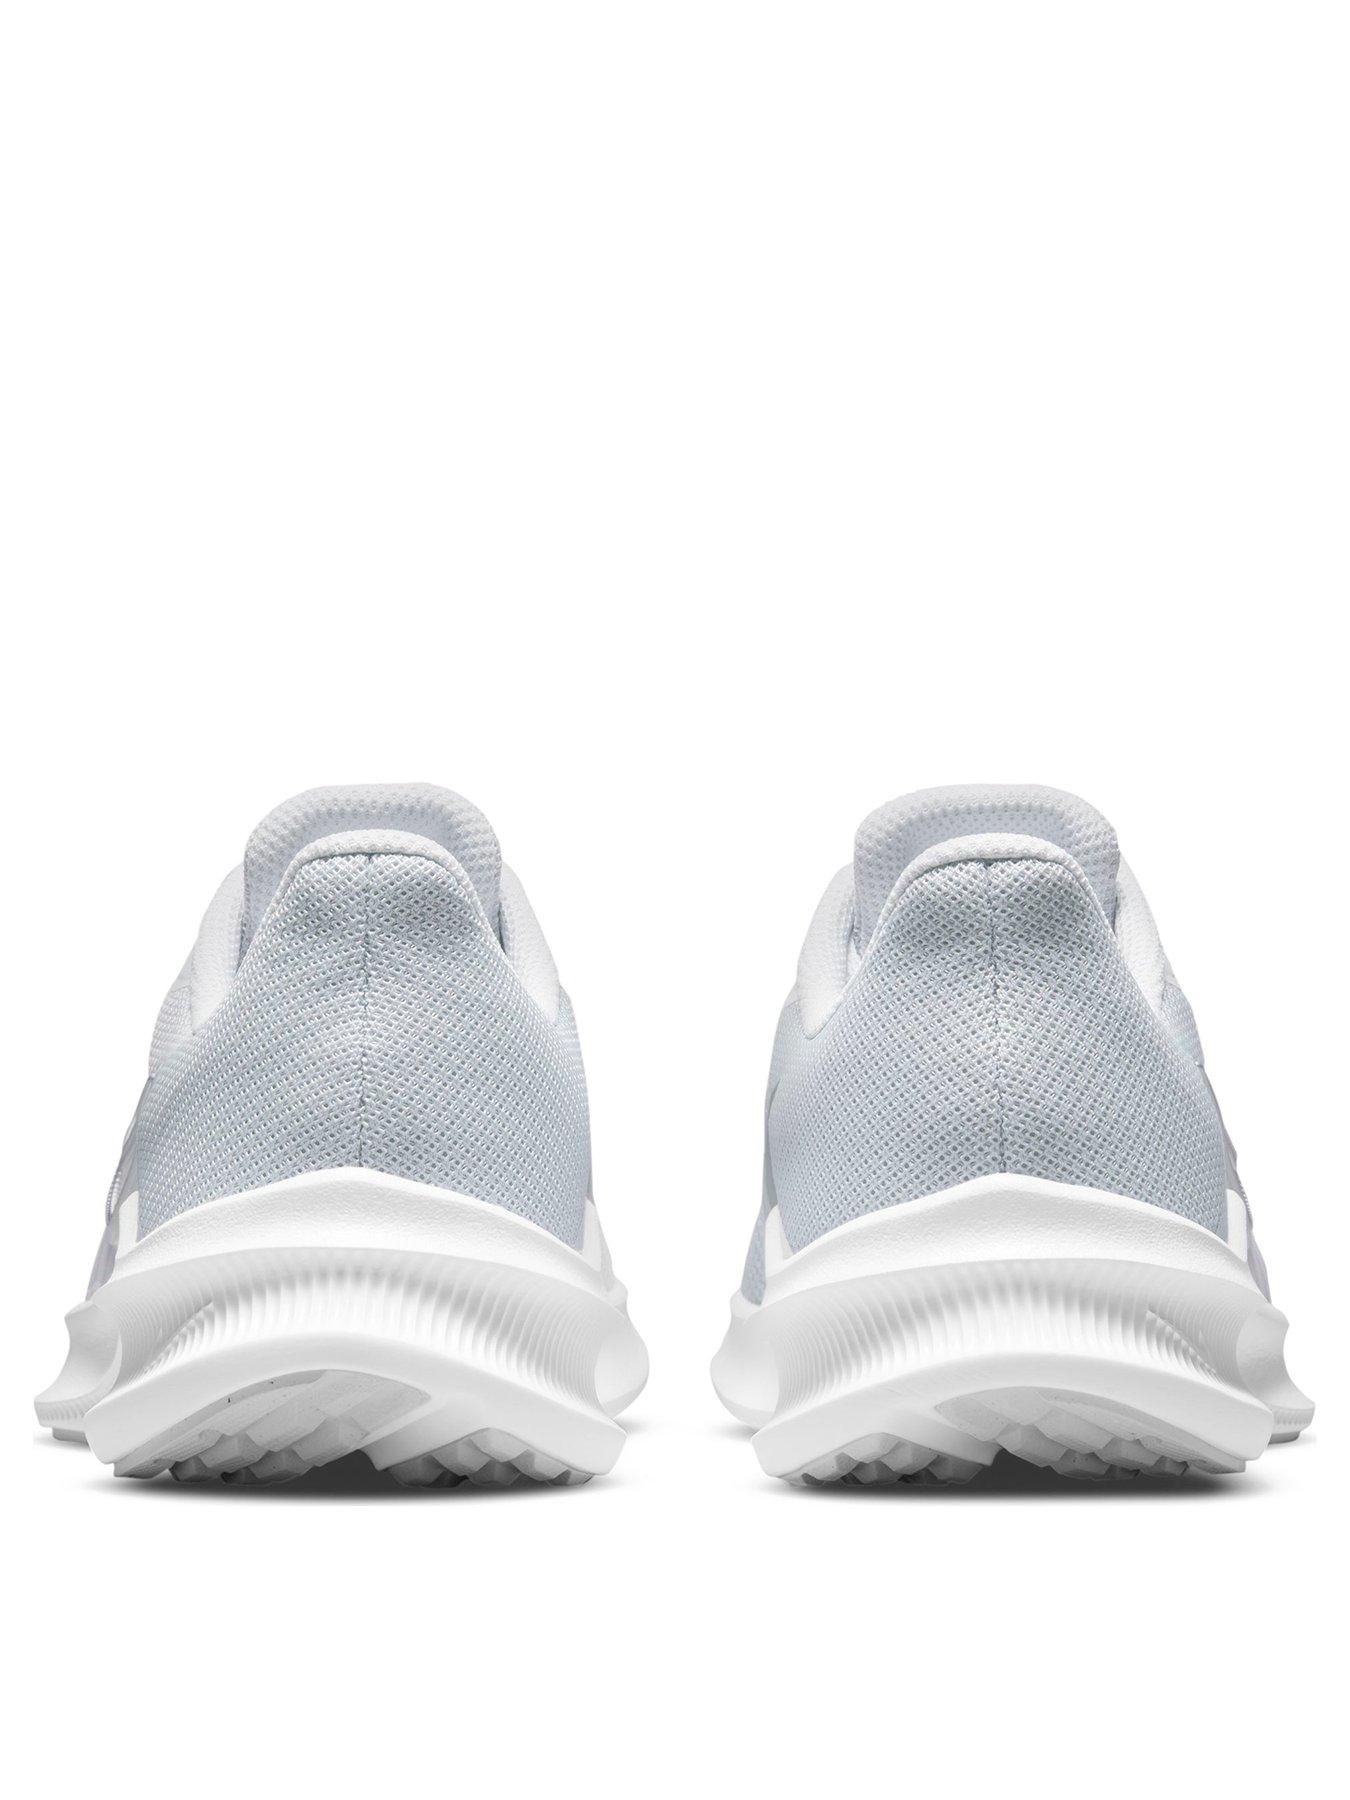 Trainers Downshifter 11 - White/Silver